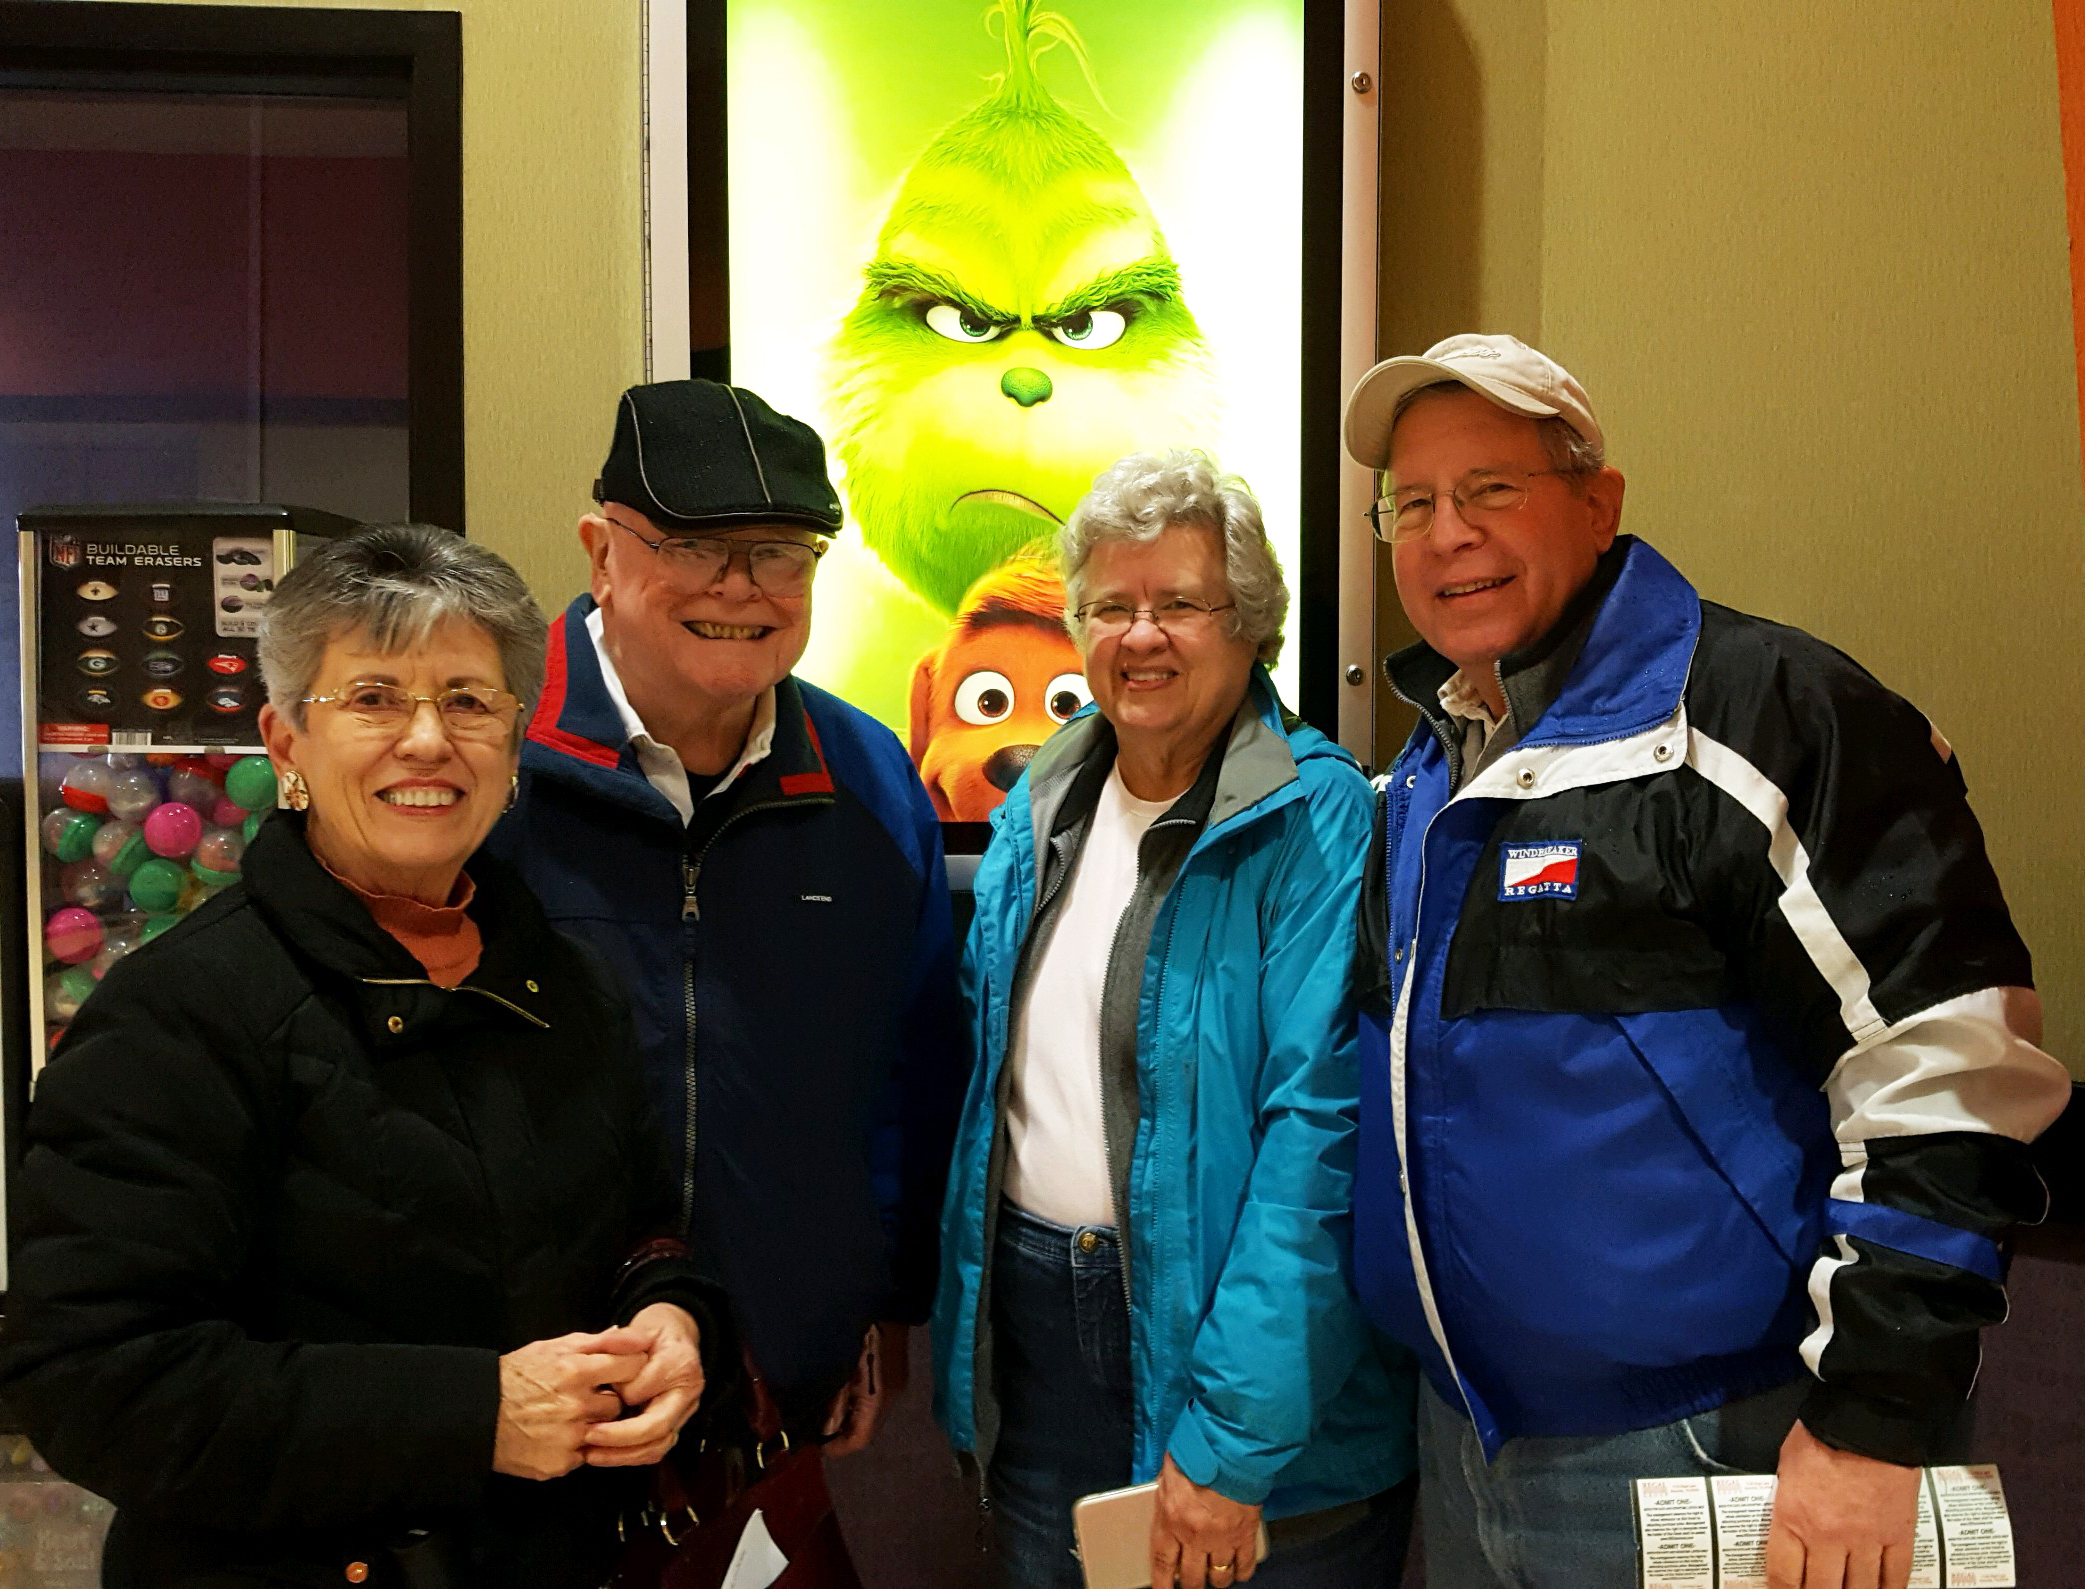 Four Cornwall Manor residents smiling in front of the movie poster for "The Grinch"